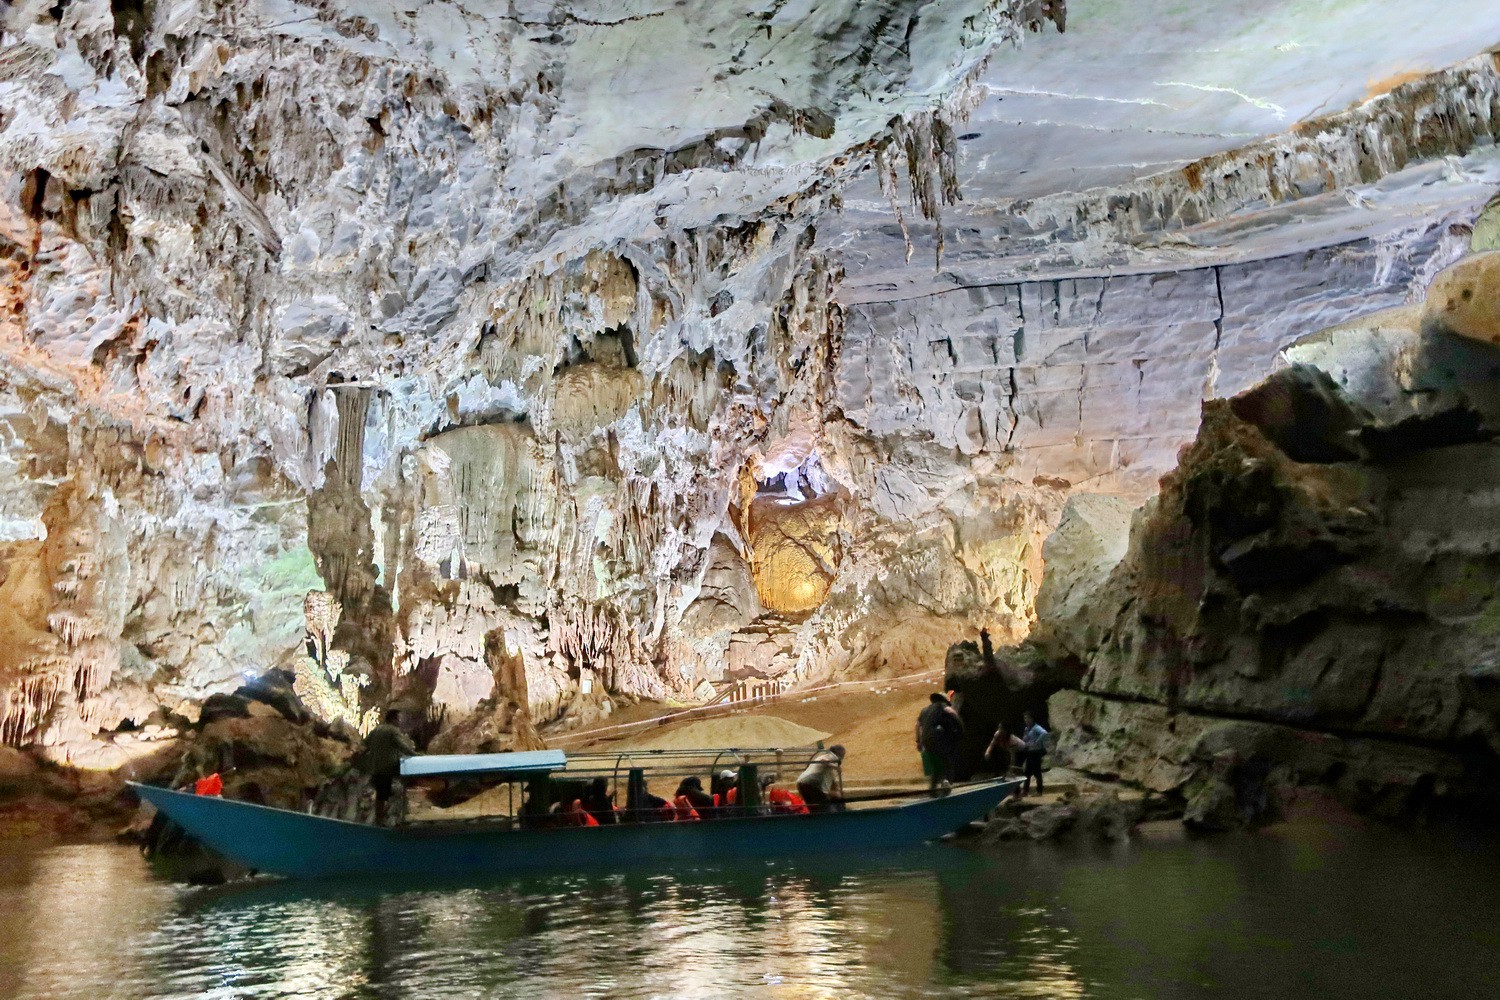 With a boat in the Phong Nha Cave